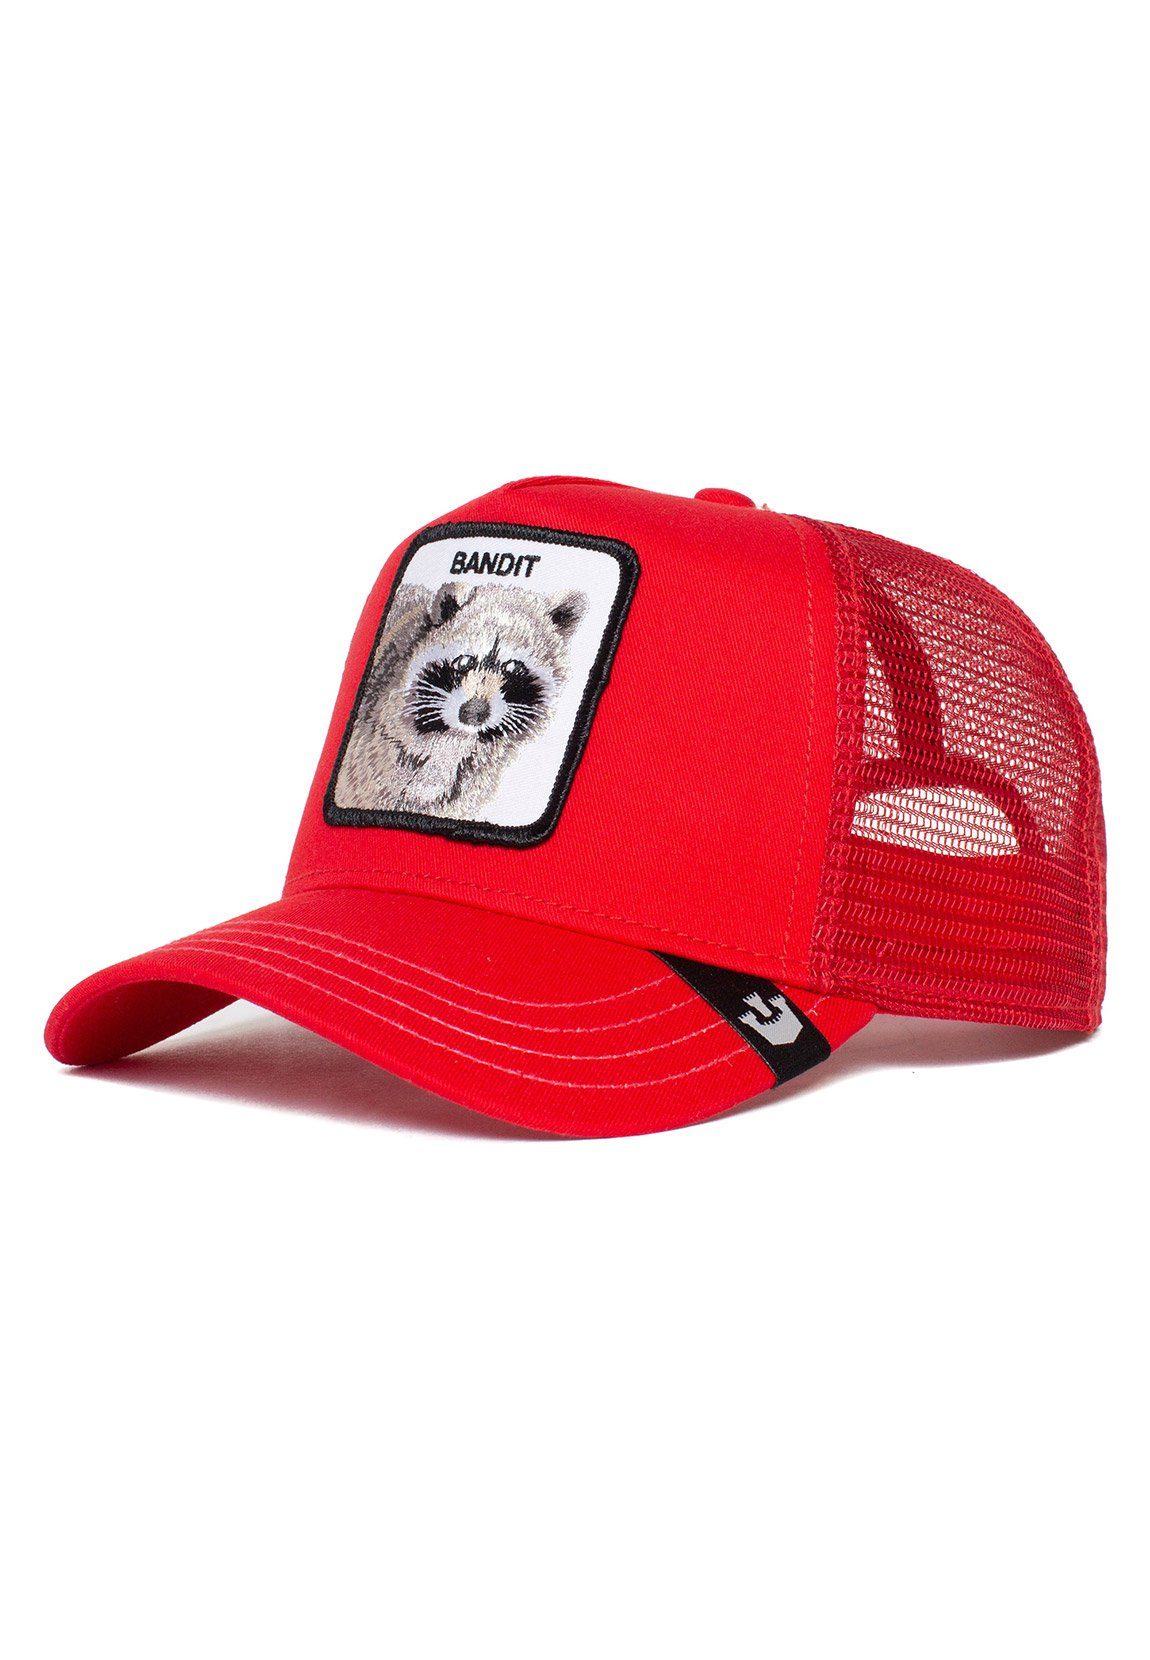 GOORIN Bros. Trucker Cap Goorin Bros. Trucker Cap THE BANDIT Red Rot